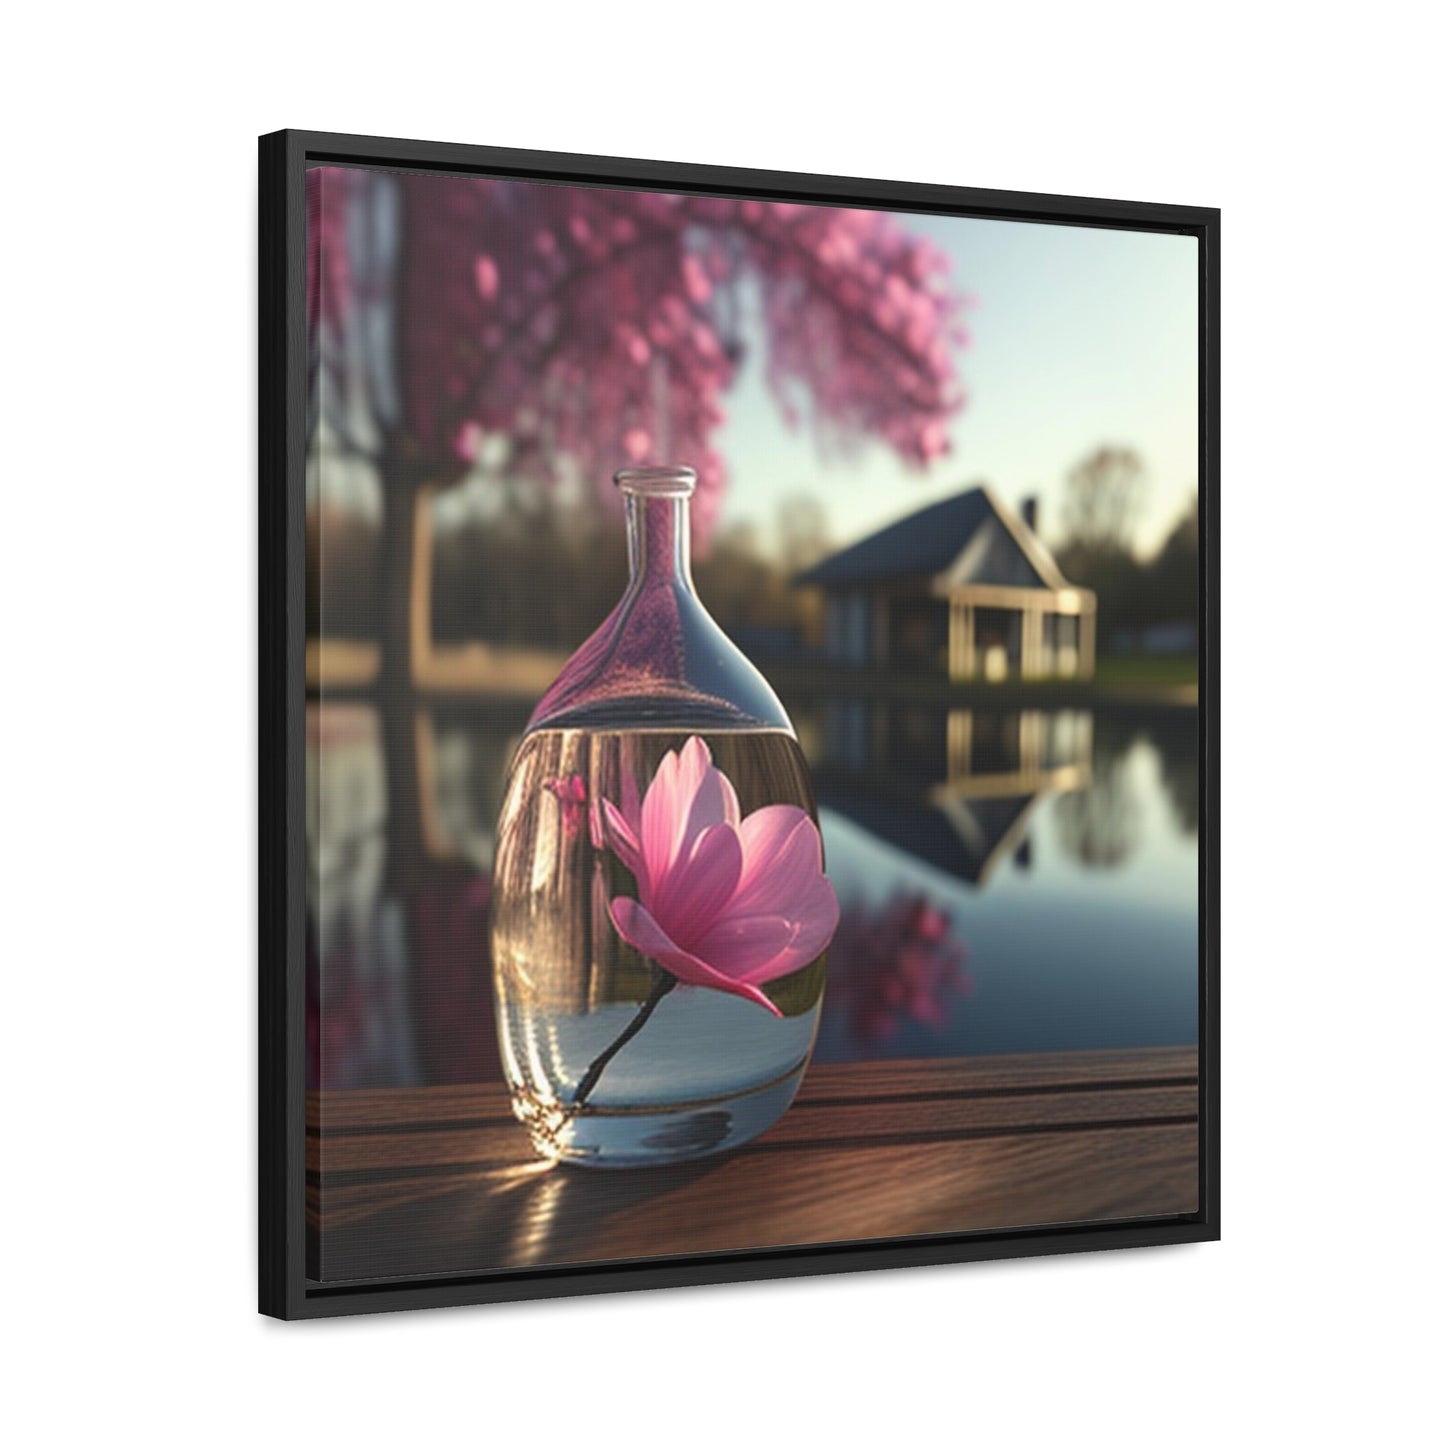 Gallery Canvas Wraps, Square Frame Magnolia in a Glass vase 2